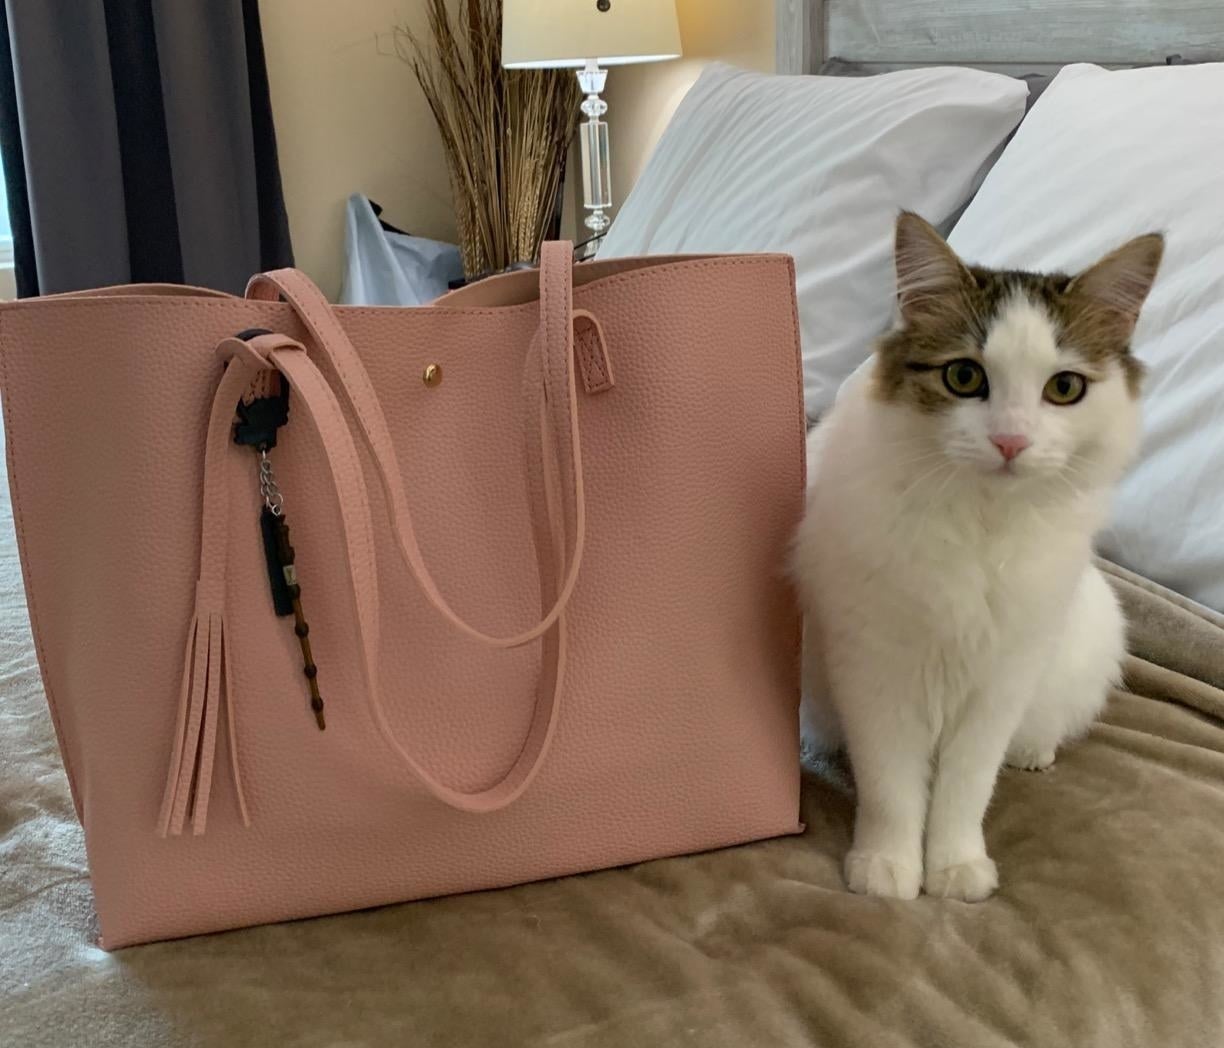 Reviewer image of pink tote bag next to a cat